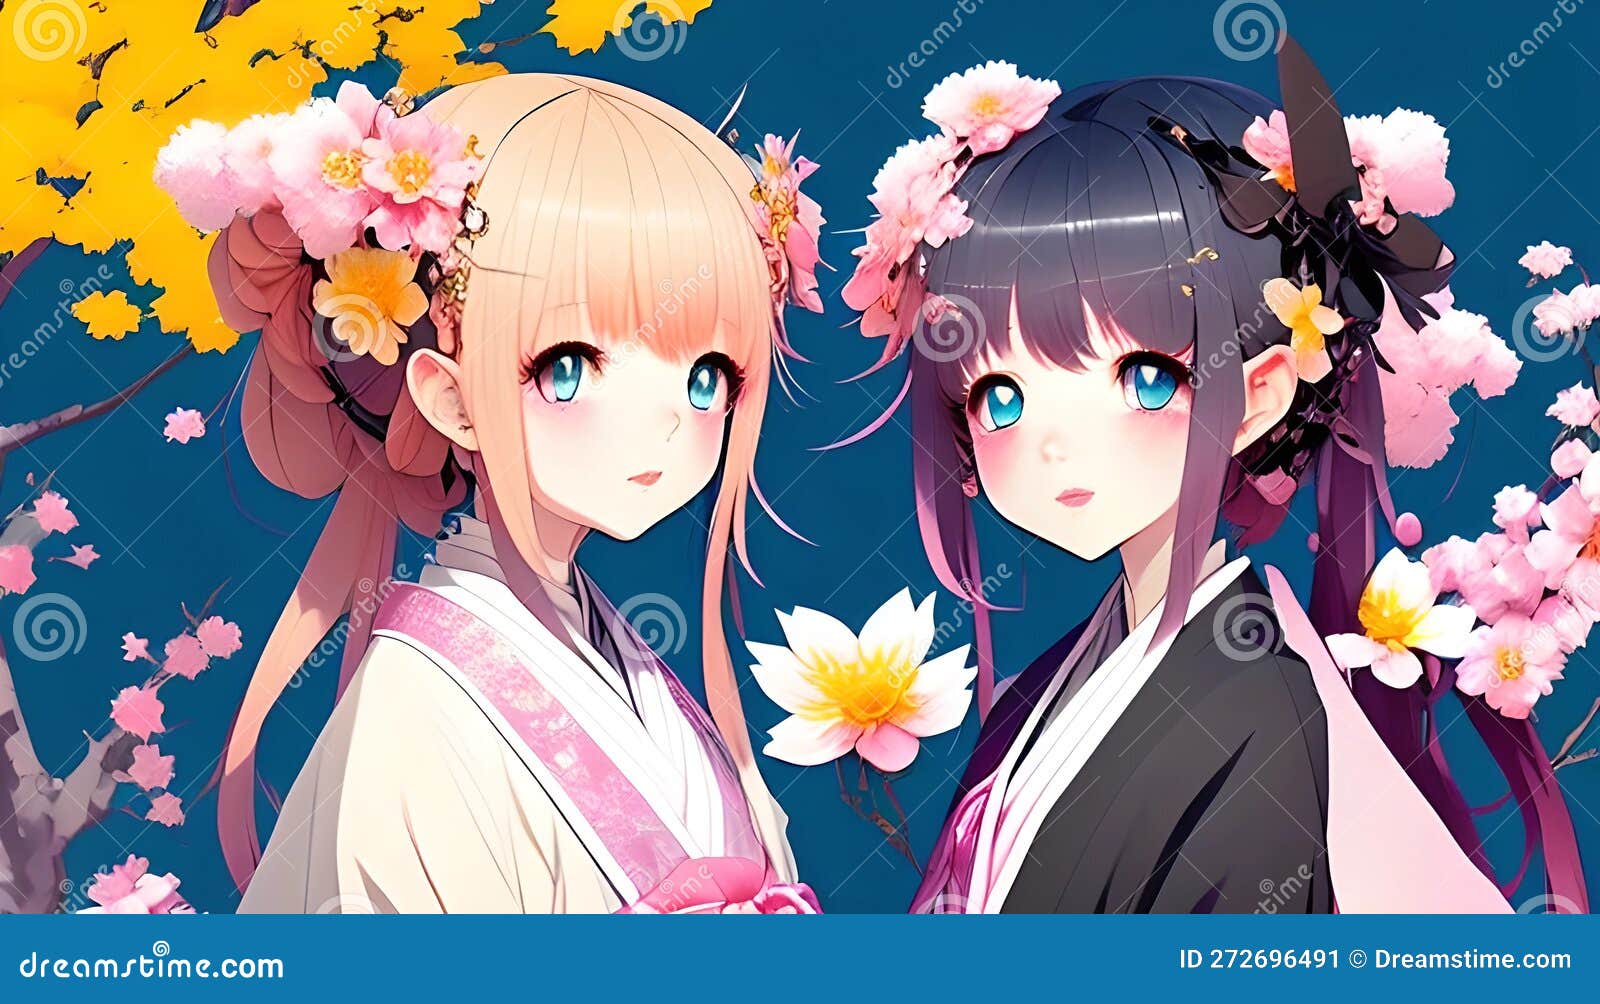 7 Cute and Fascinating Sets of Twin Girl Anime Characters - VISADA.ME